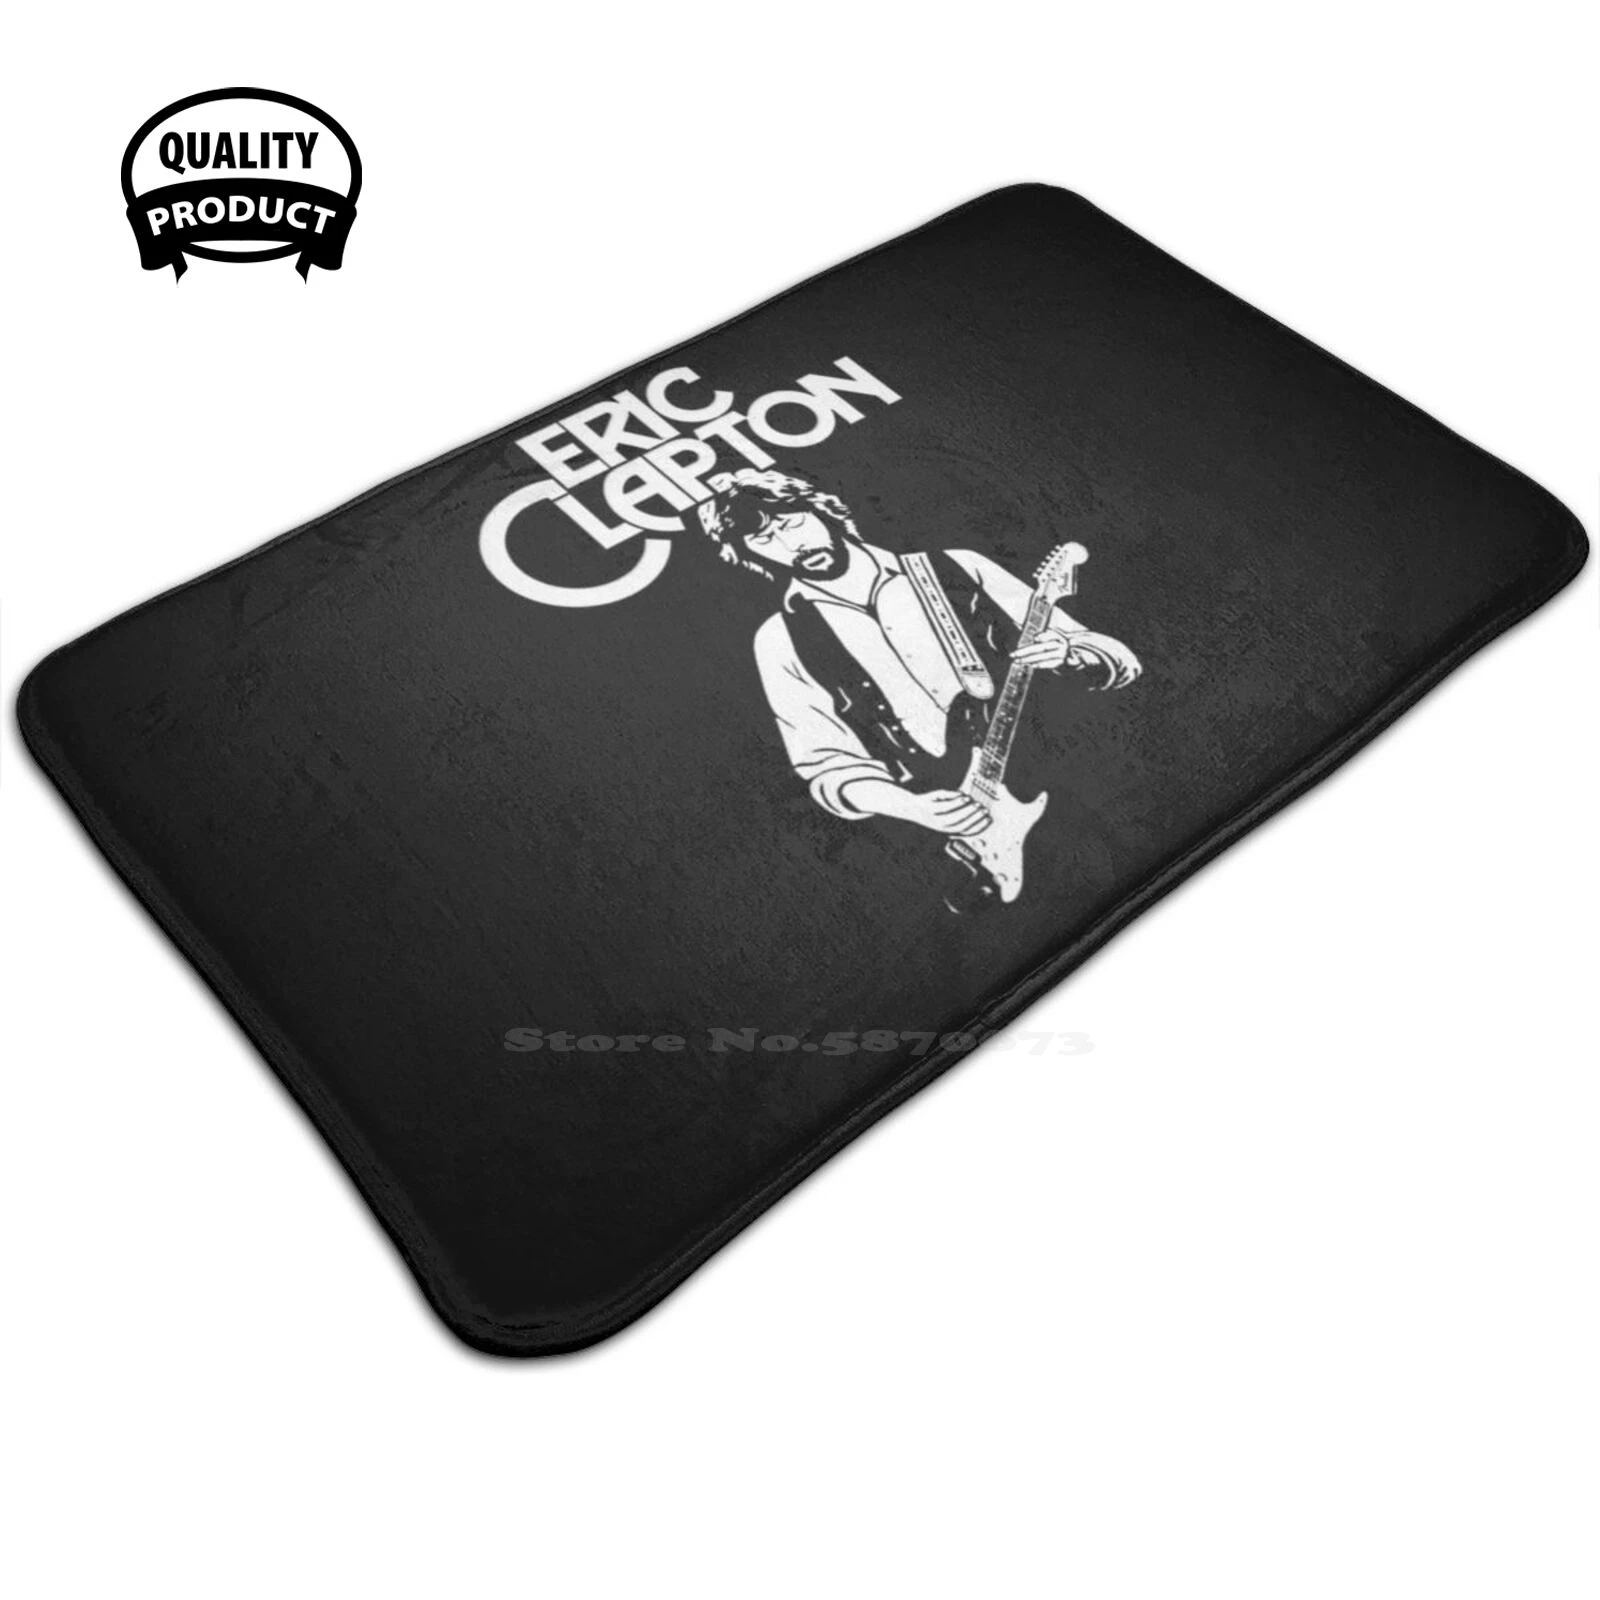 Eric Clapton Door Mat Foot Pad Home Rug System Wake Up Music Lyrics Funny  Mumble System Of A Down Chop Suey A Down Grab A Song - Mat - AliExpress